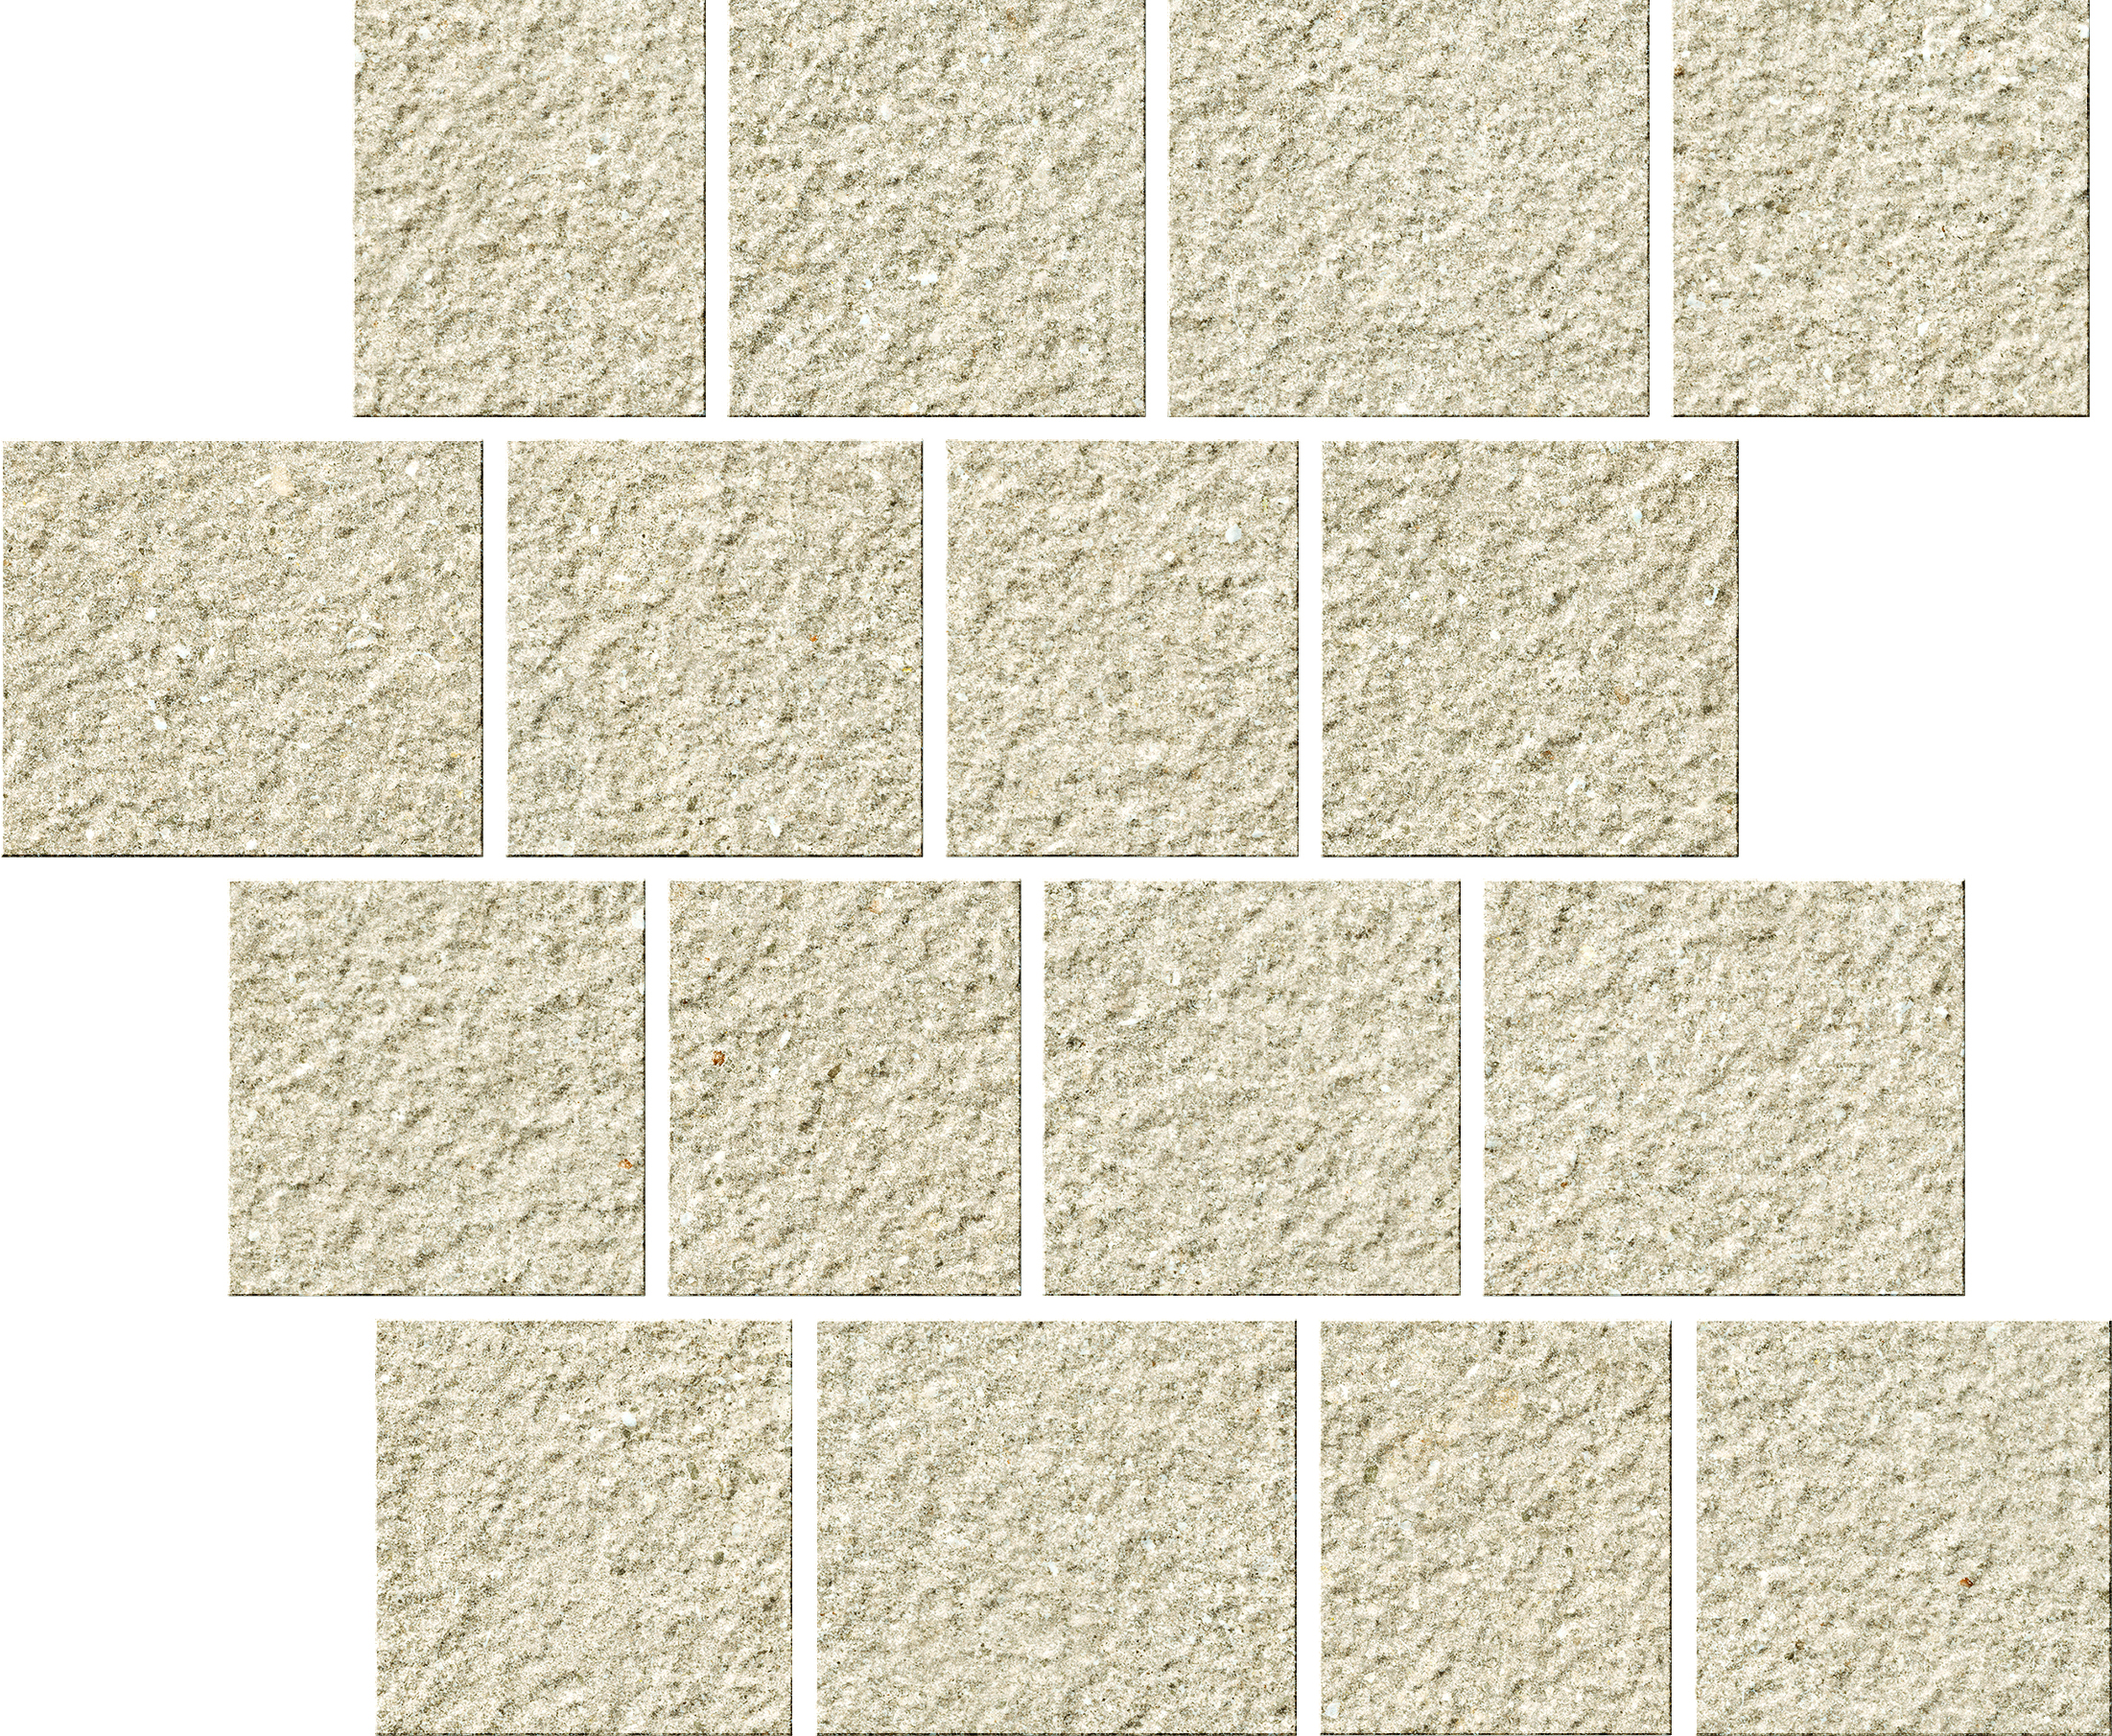 Serenissima Eclettica Beige Rock Mosaic Pave 1082438 30x30cm rectified 9,5mm